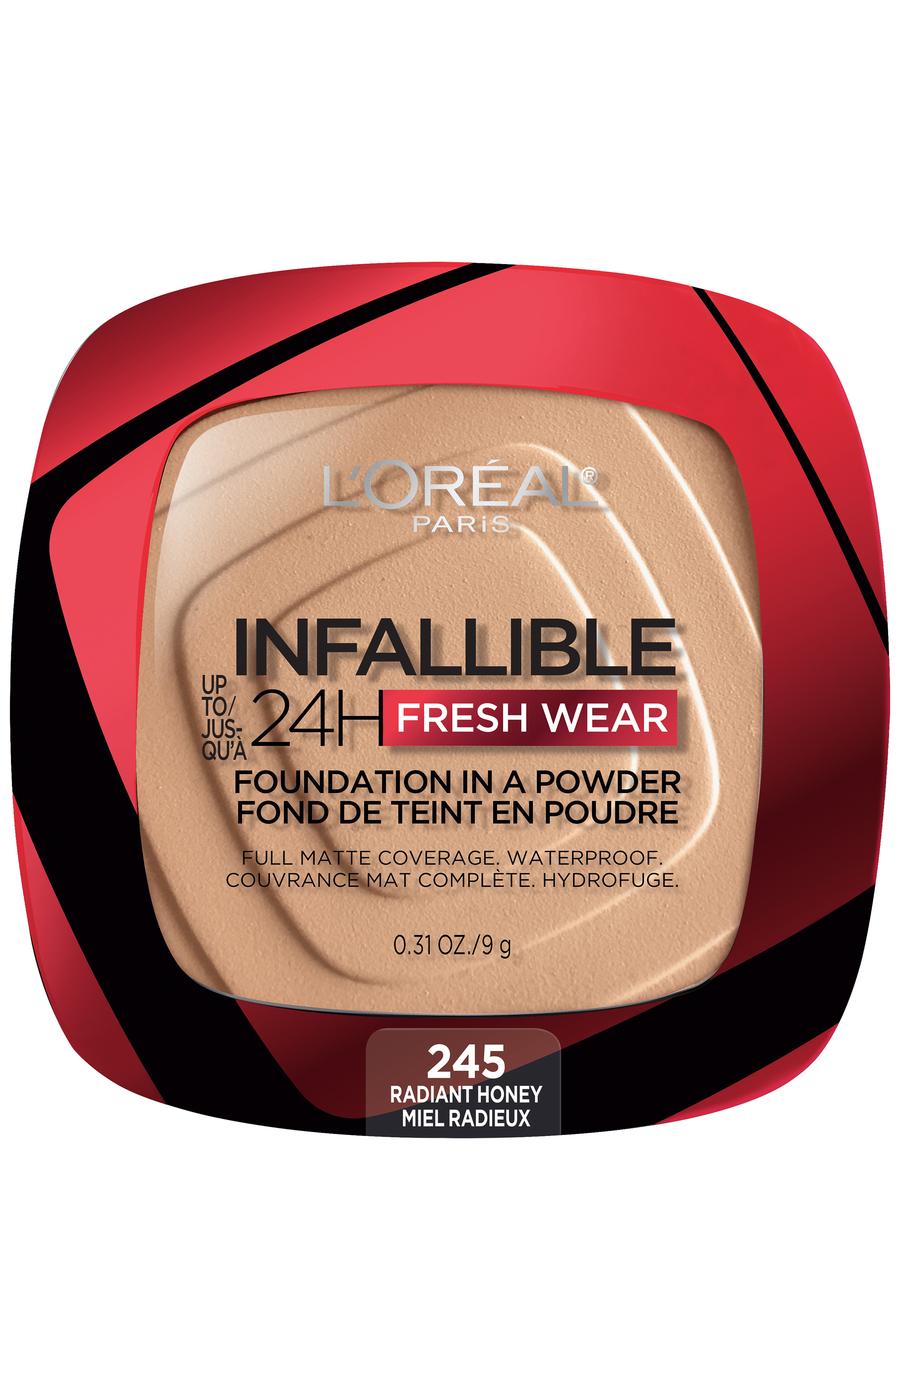 L'Oréal Paris Infallible Up to 24H Fresh Wear Foundation in a Powder Radiant Honey; image 1 of 4